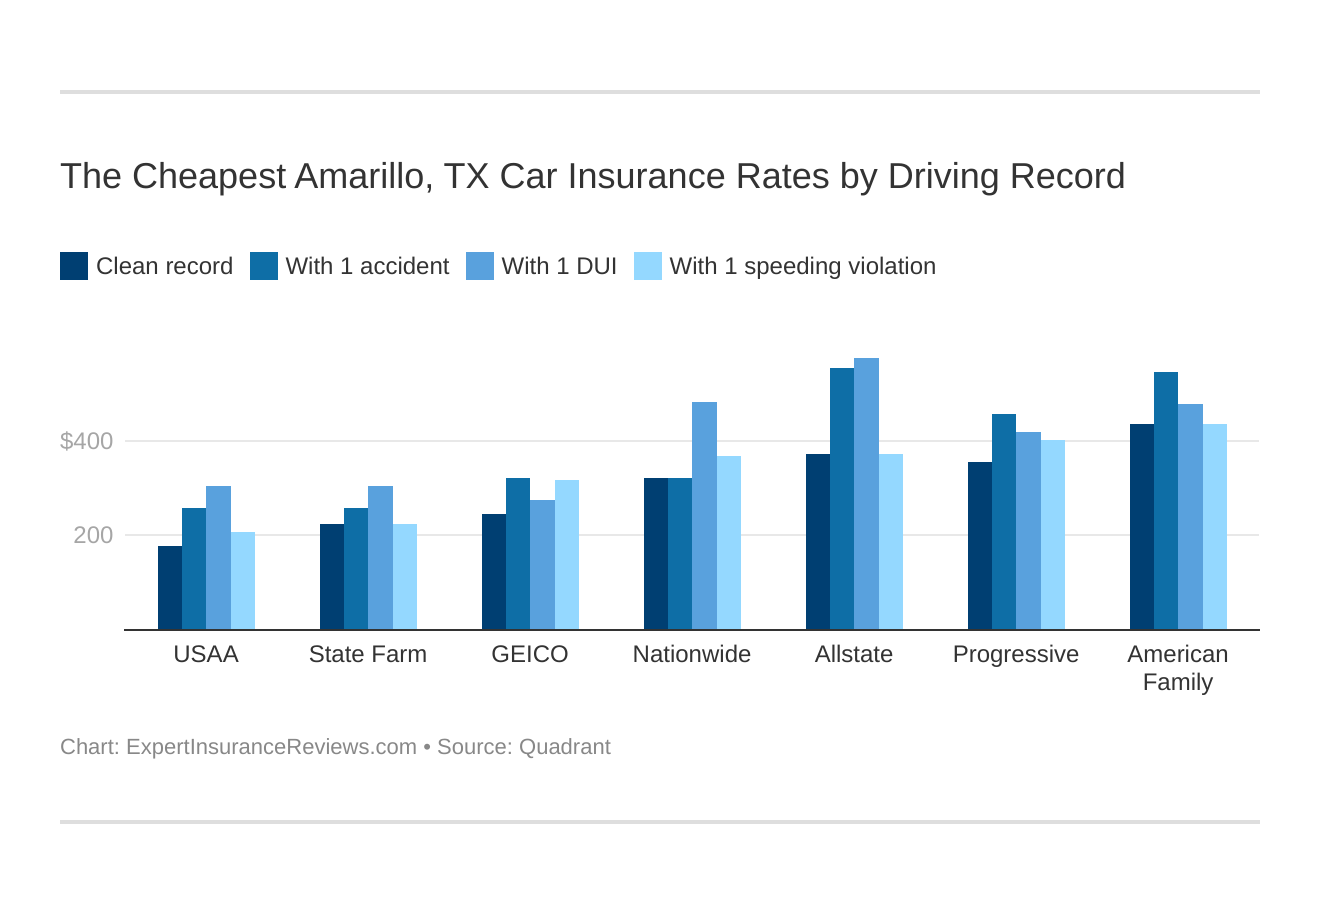 The Cheapest Amarillo, TX Car Insurance Rates by Driving Record